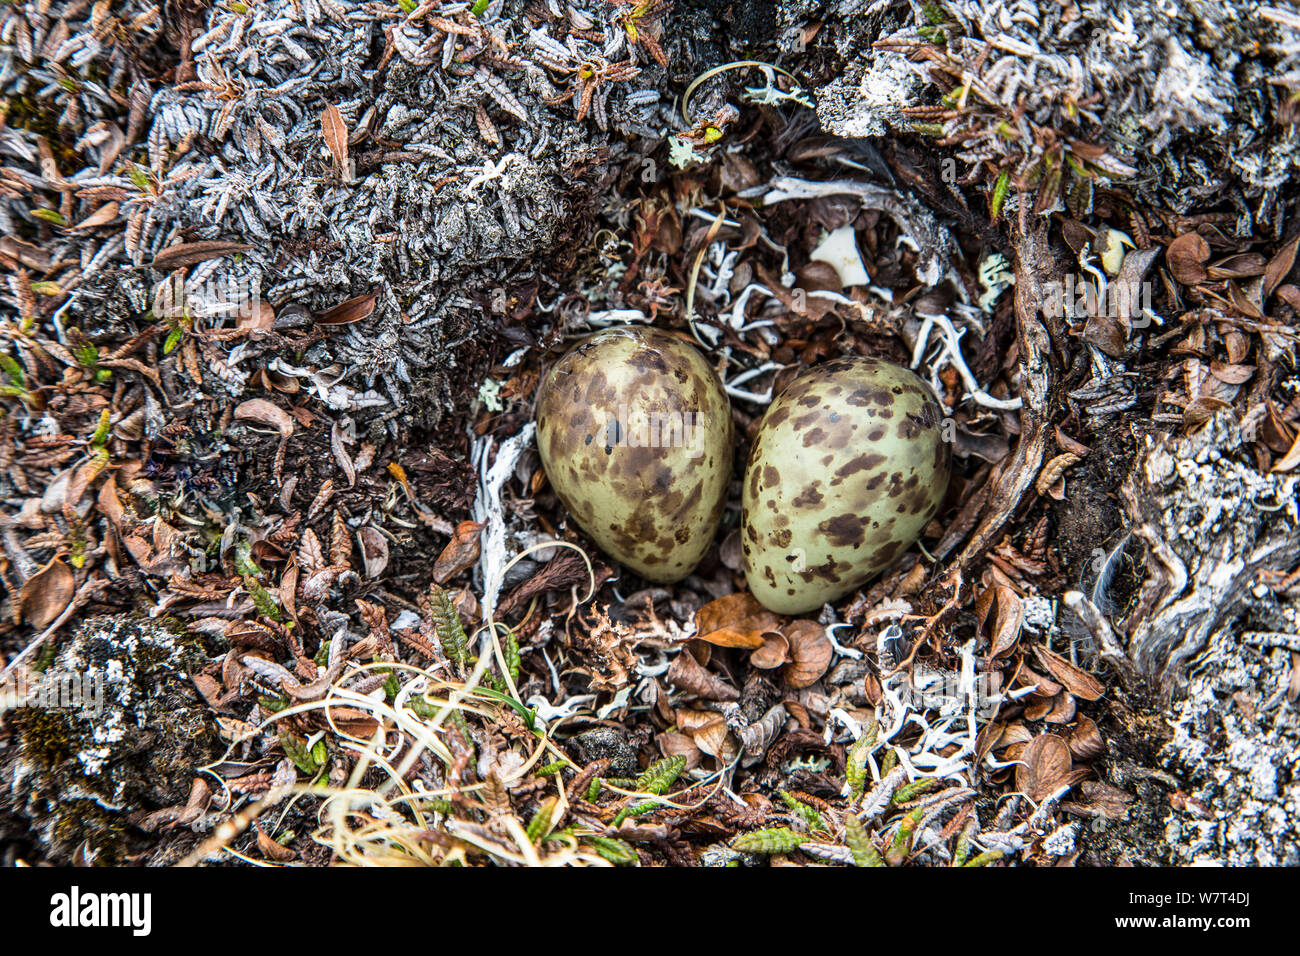 European Golden Plover (Pluvialis apricaria) two eggs in a nest on the ground, Spitzbergen, Svalbard. Norway, June. Stock Photo